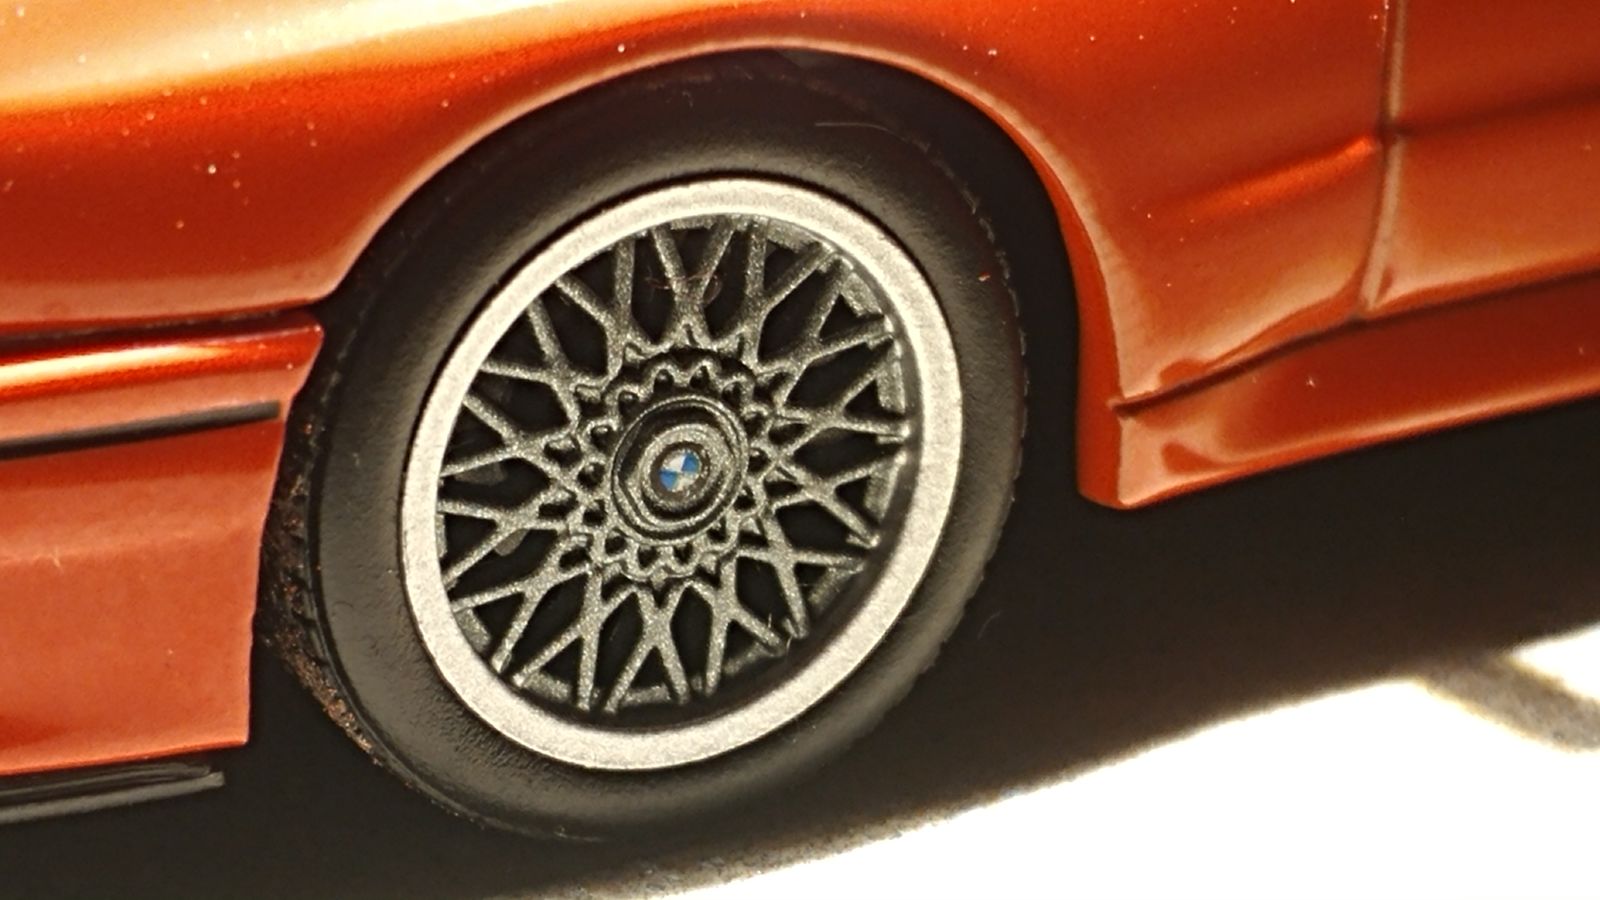 That is some nice detail. Tiny center cap that clearly says “BMW” on the roundel. 